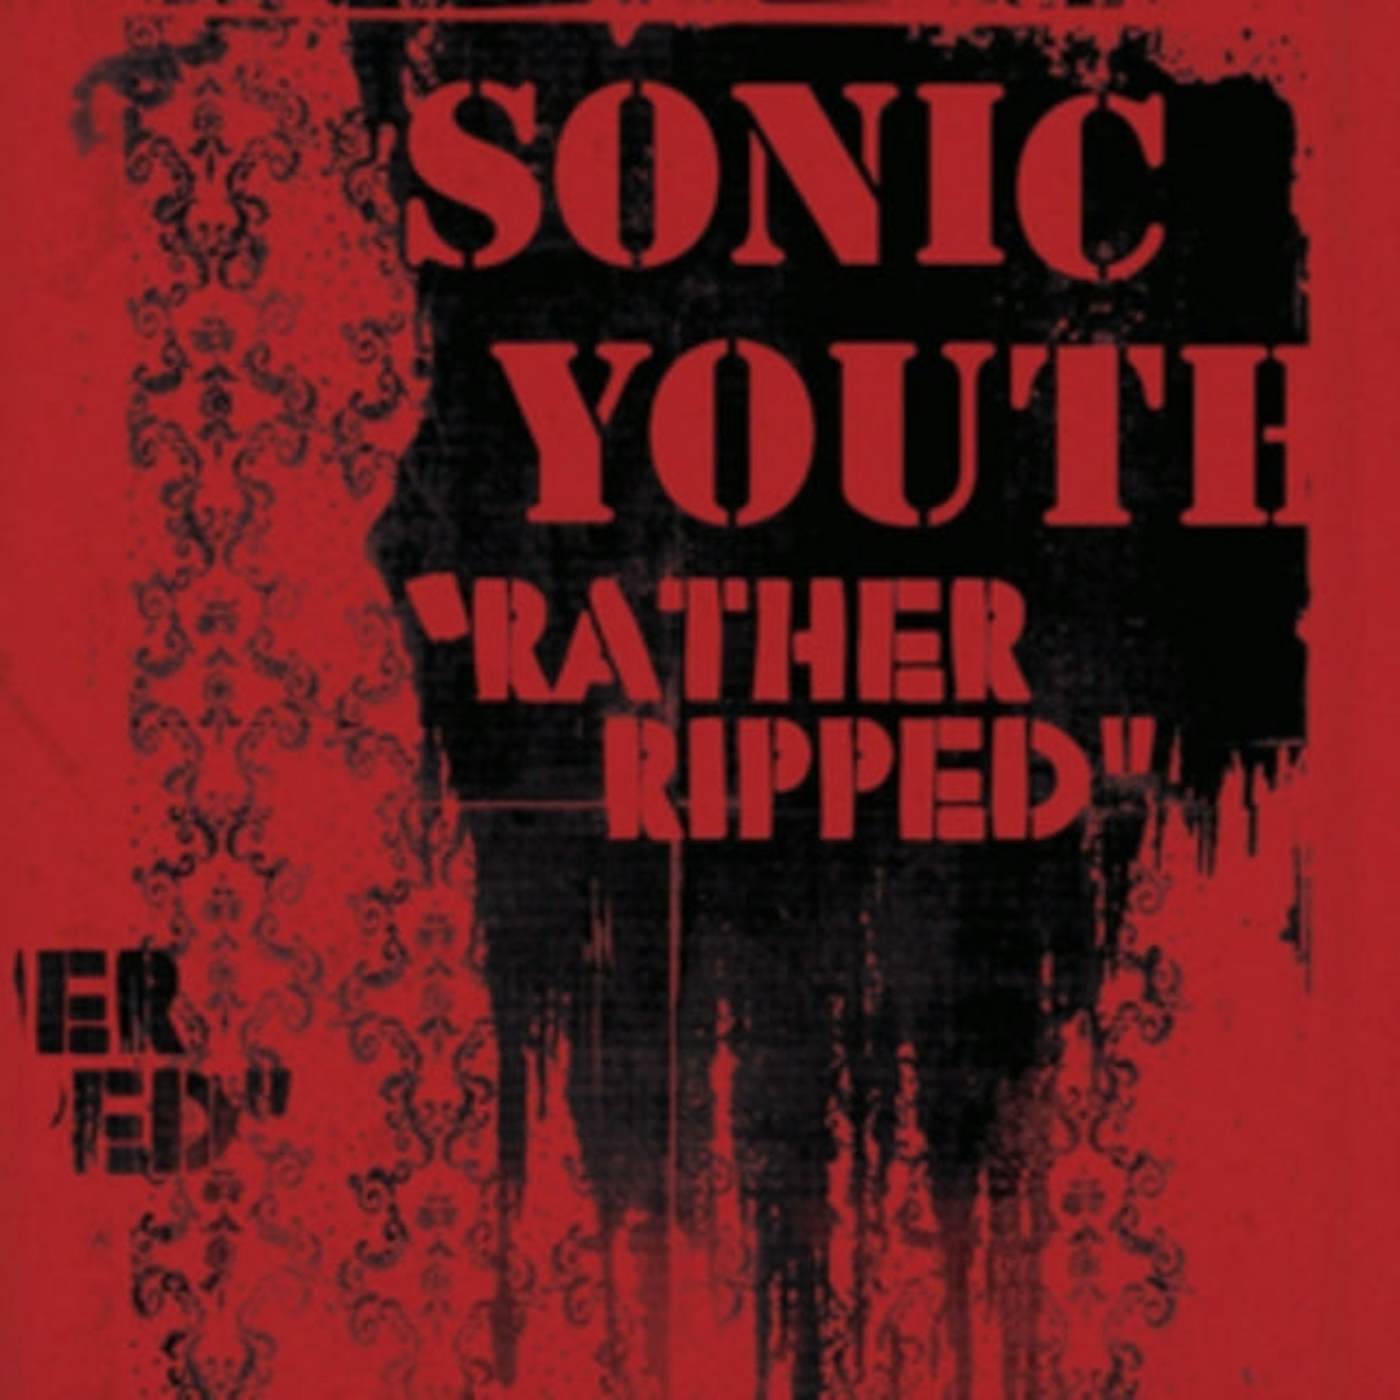 Sonic Youth LP Vinyl Record - Rather Ripped